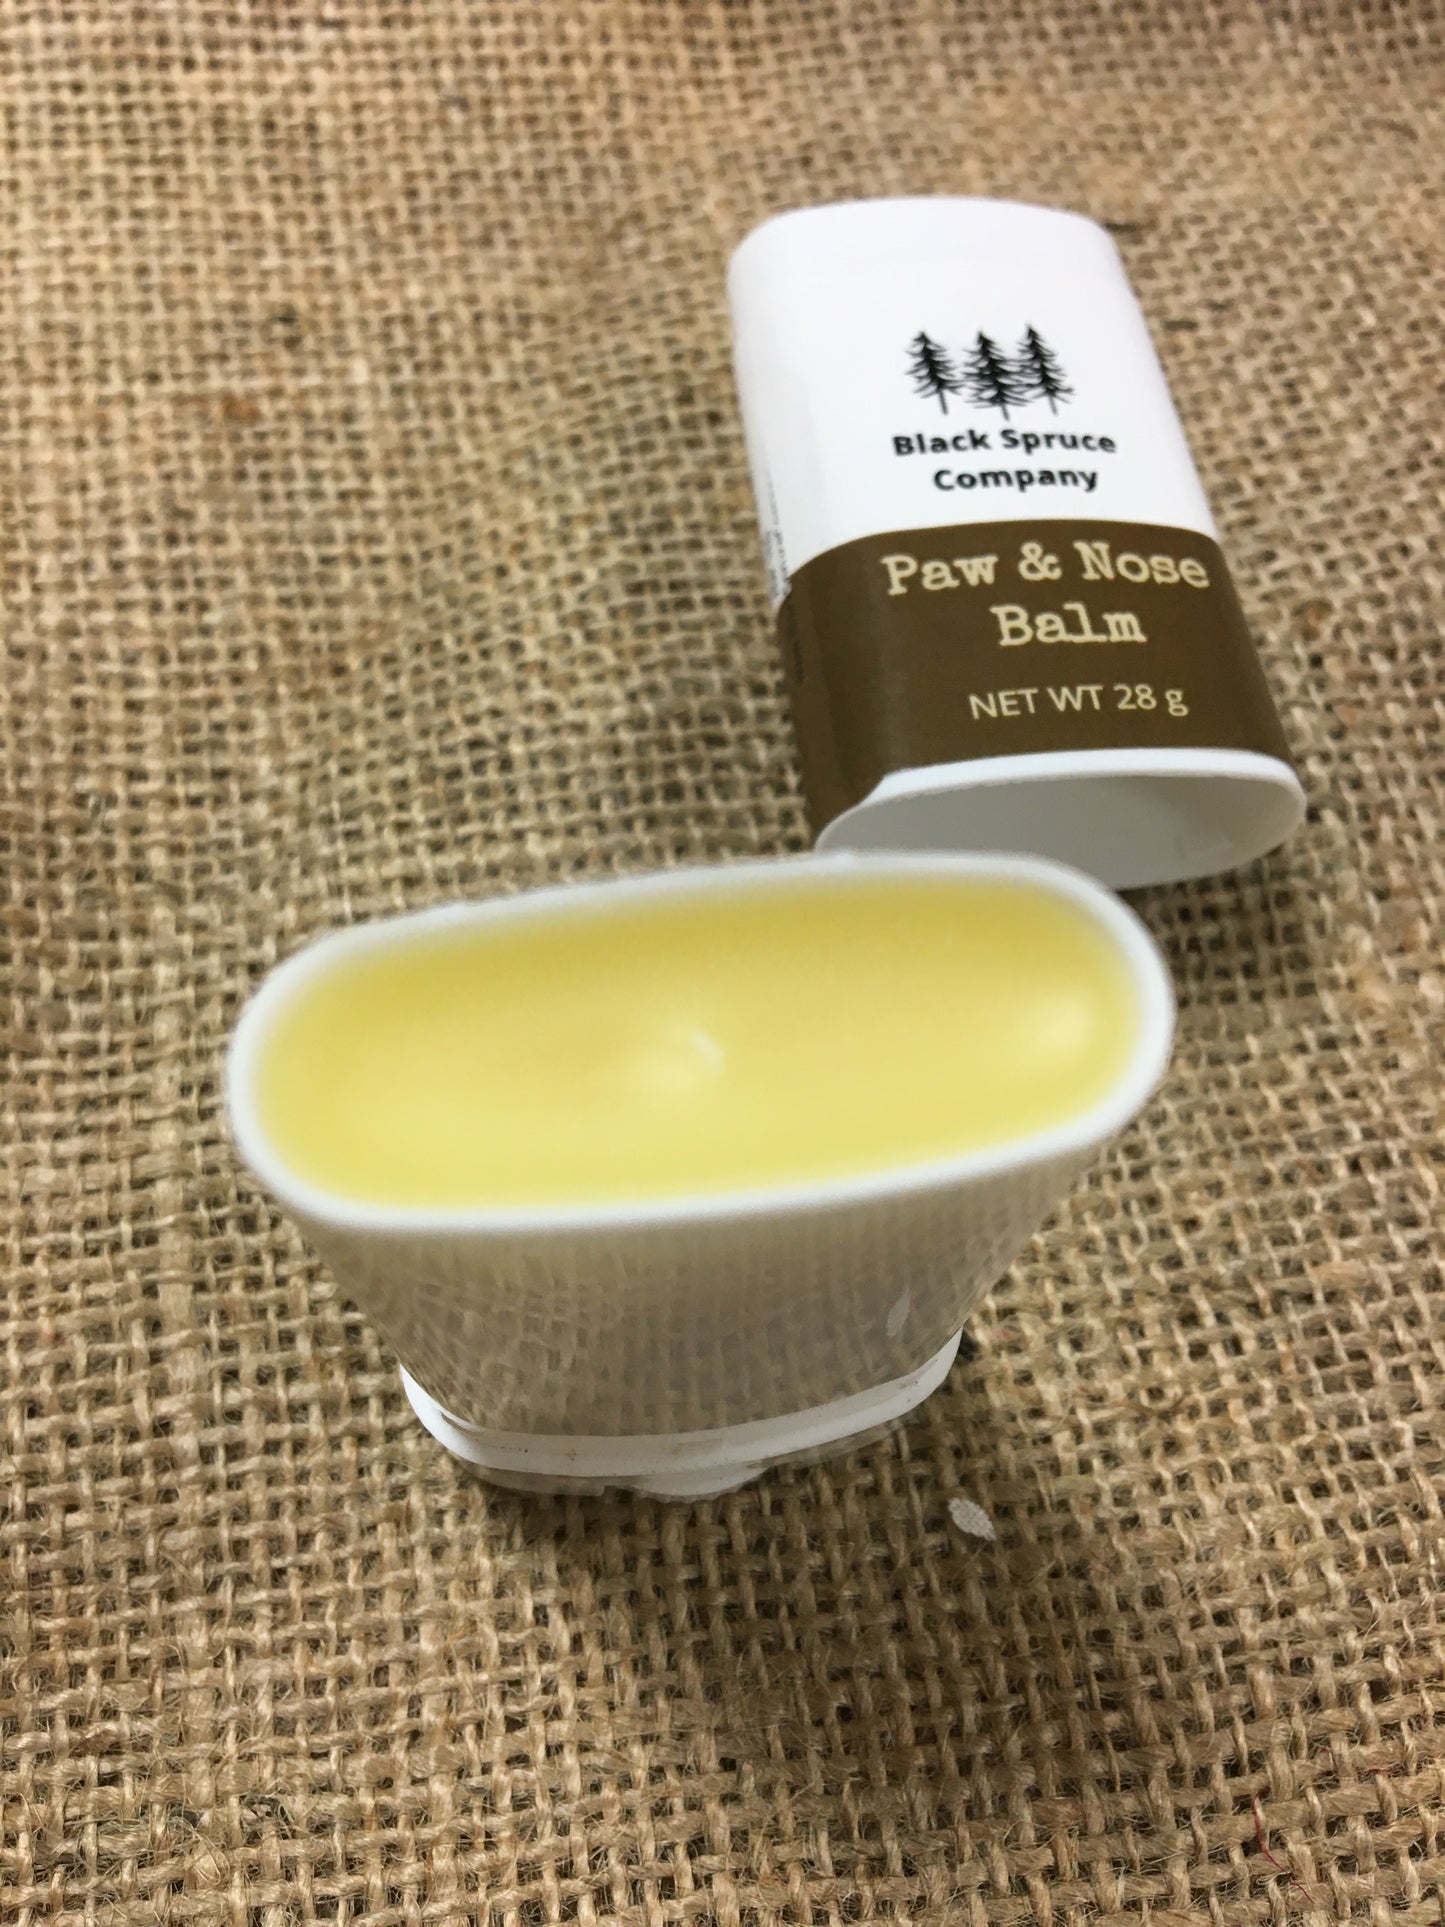 Paw and Nose Balm open with product visible